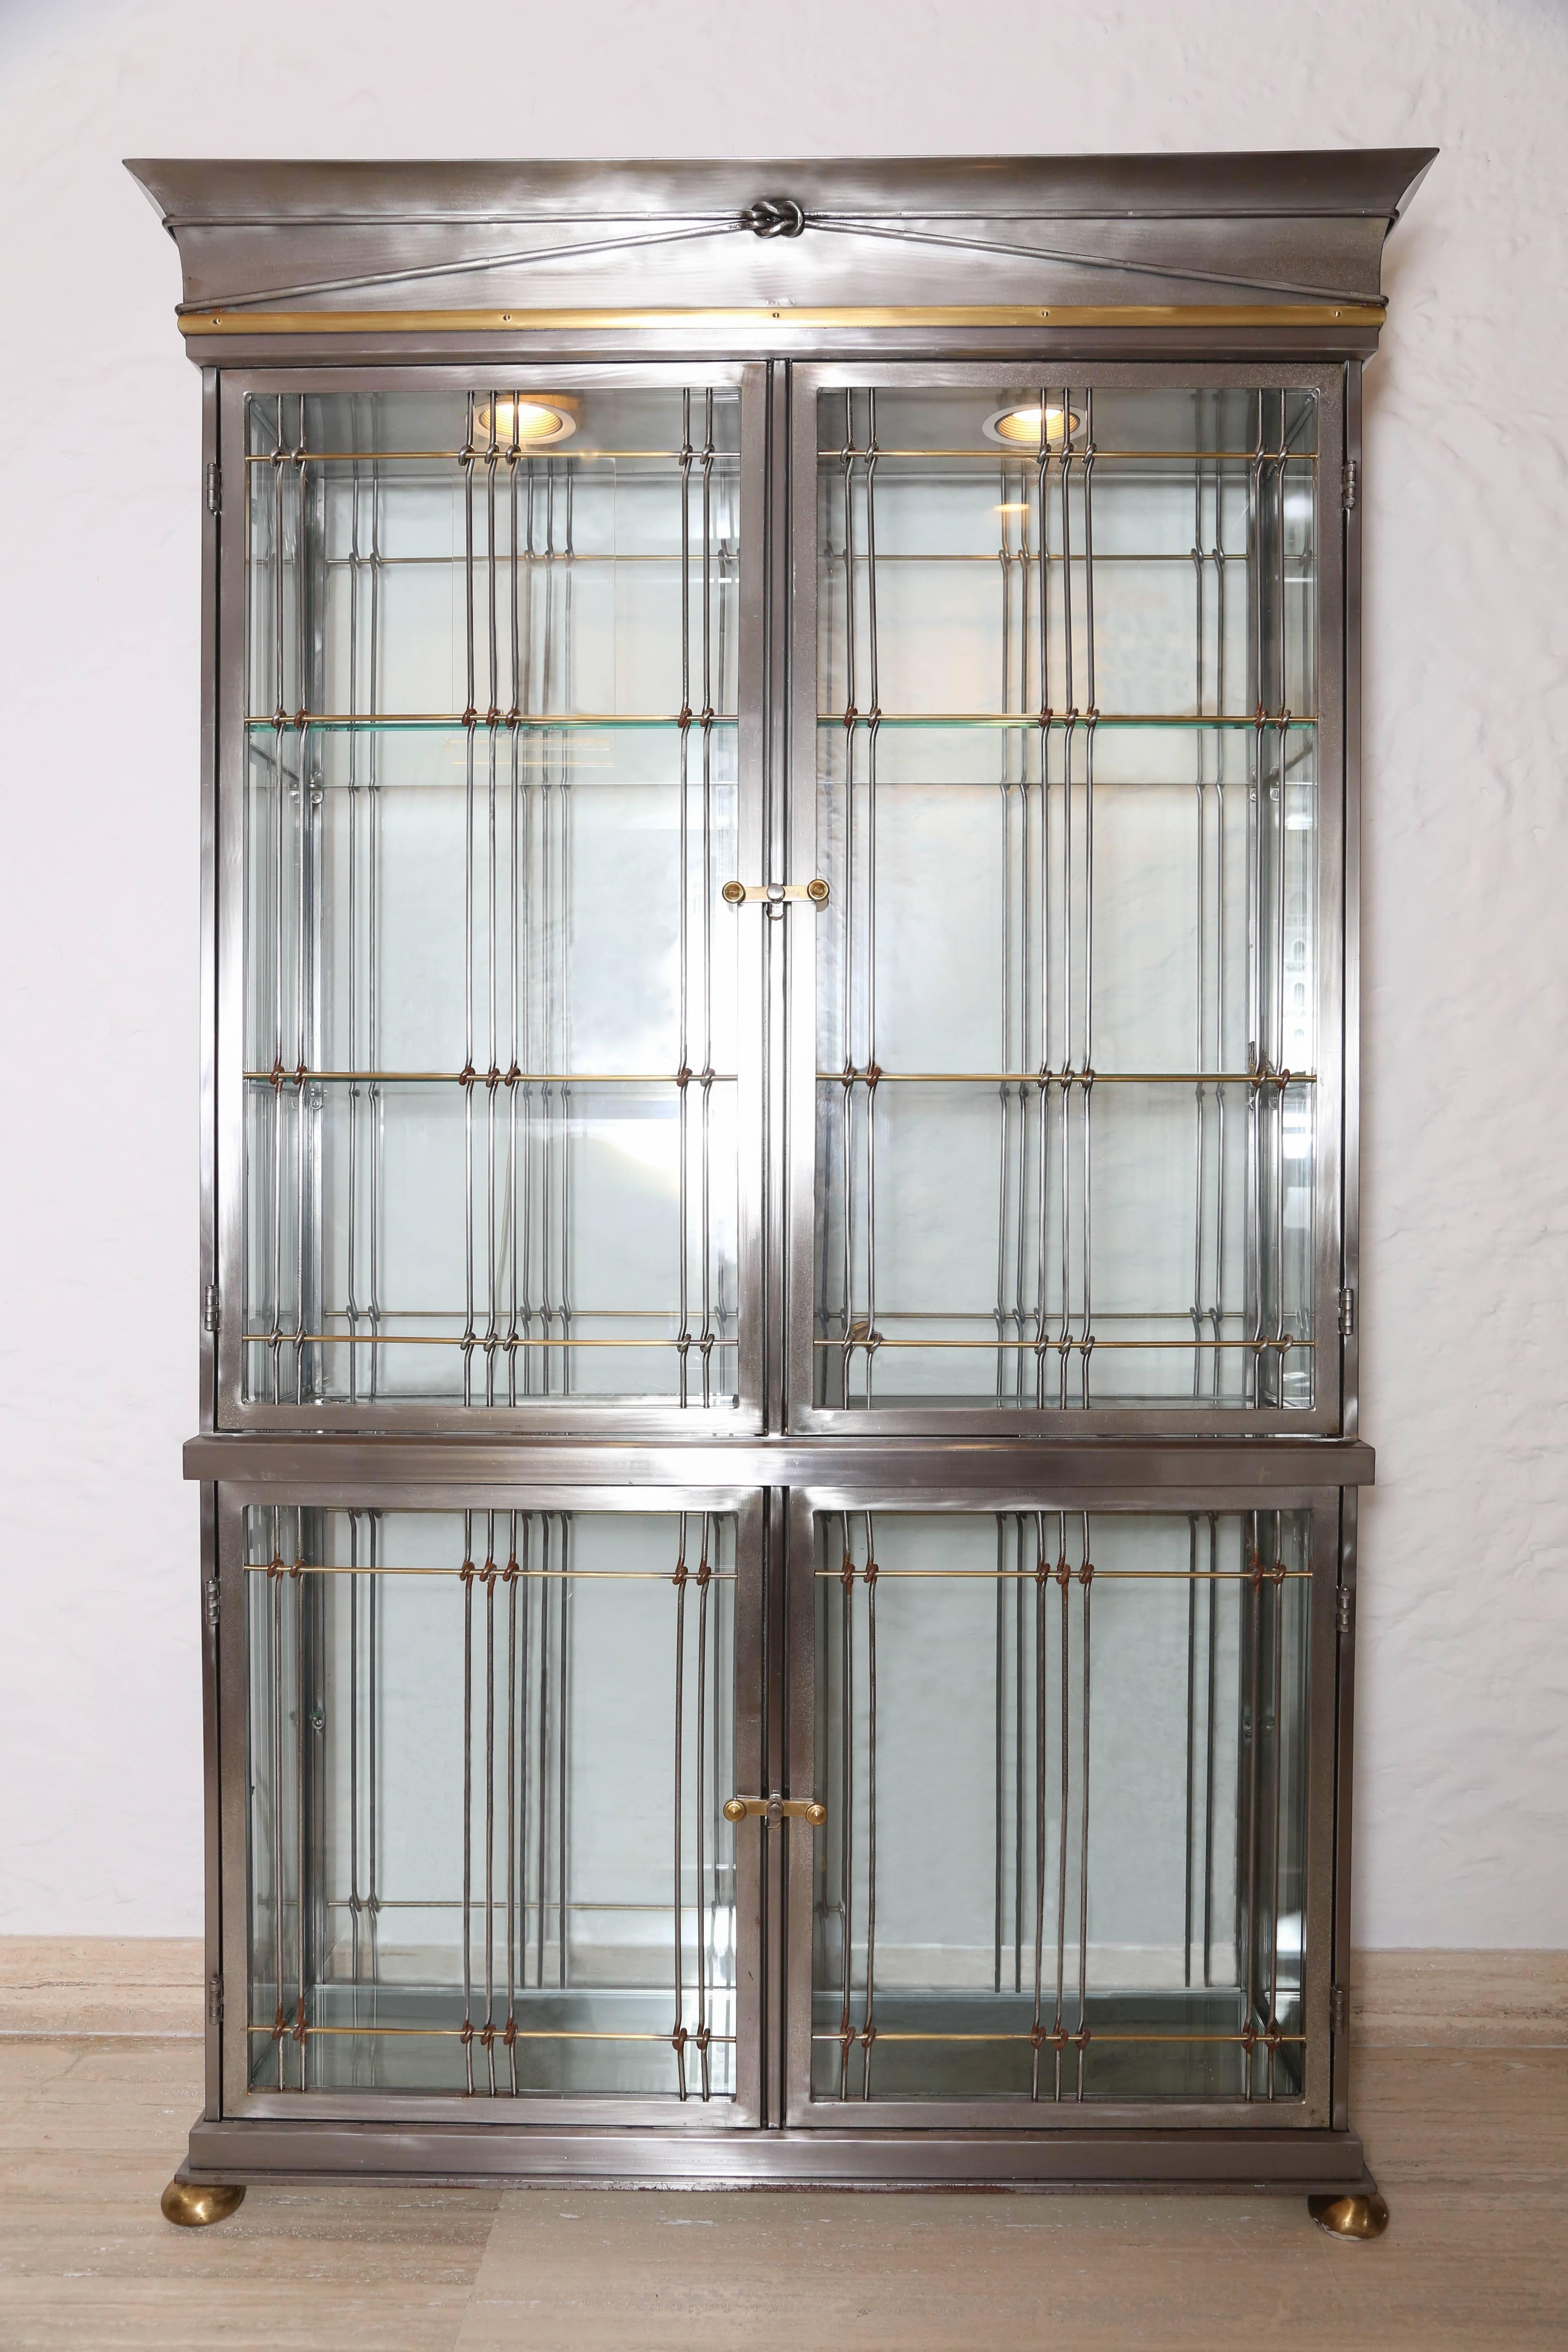 An elegant pair of four-doors display cabinets in stainless steel and glass lighted from the top parts. Commissioned pieces by Maison Jansen for Hermes New York.
Measure: Bottom part height 31 in, width 46 in, depth 18 in.